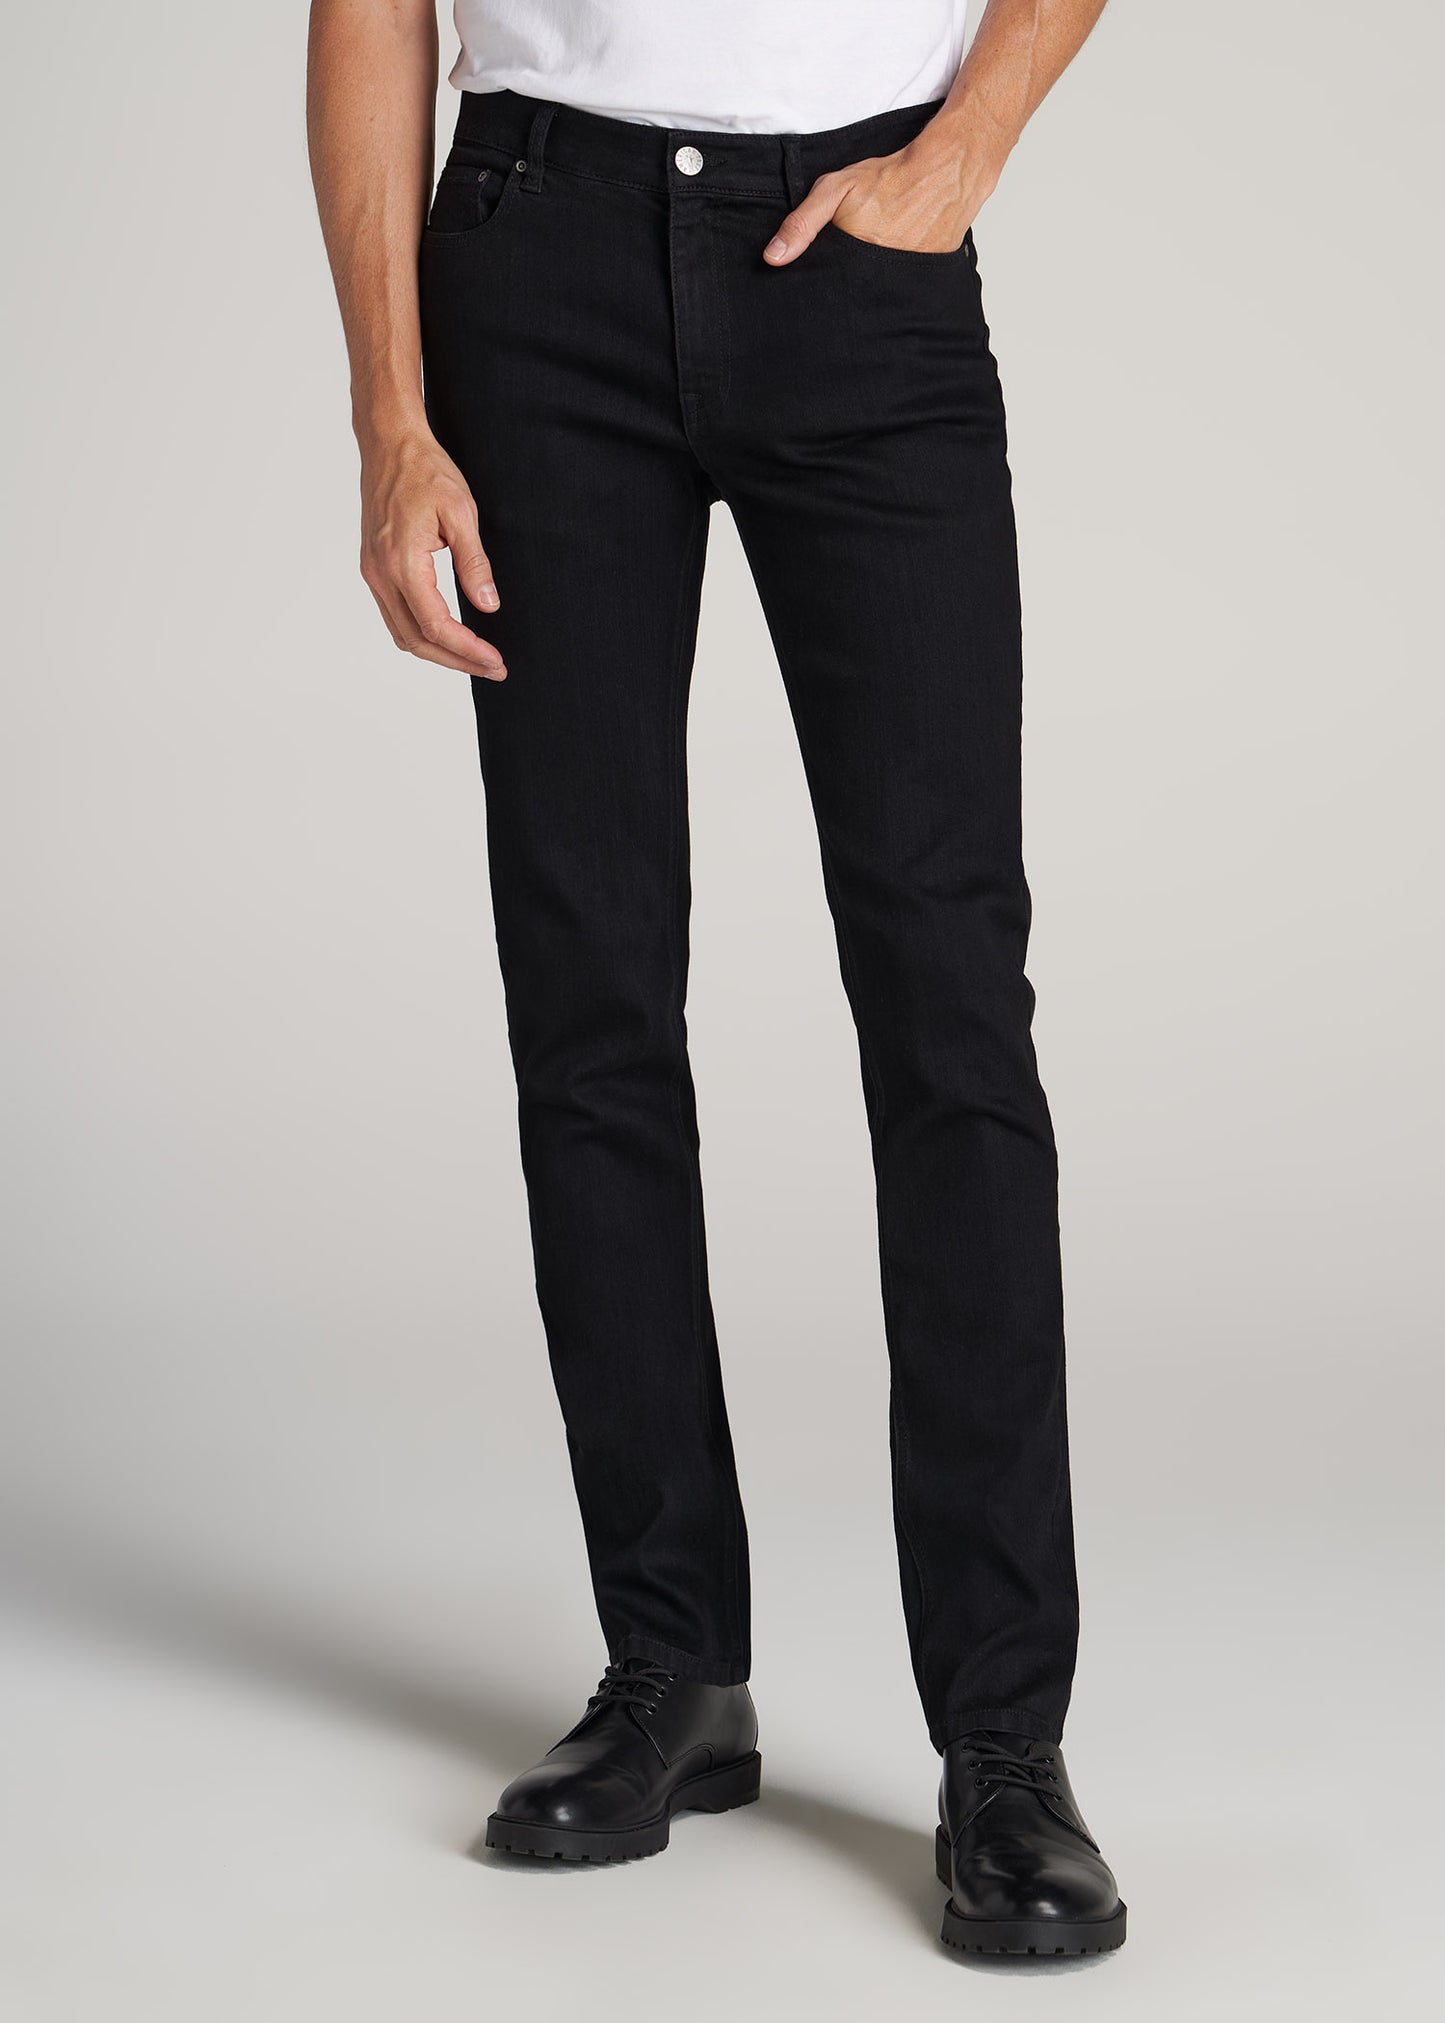 Tall guy wearing American Tall's Dylan Slim-Fit Jeans in the color Black.